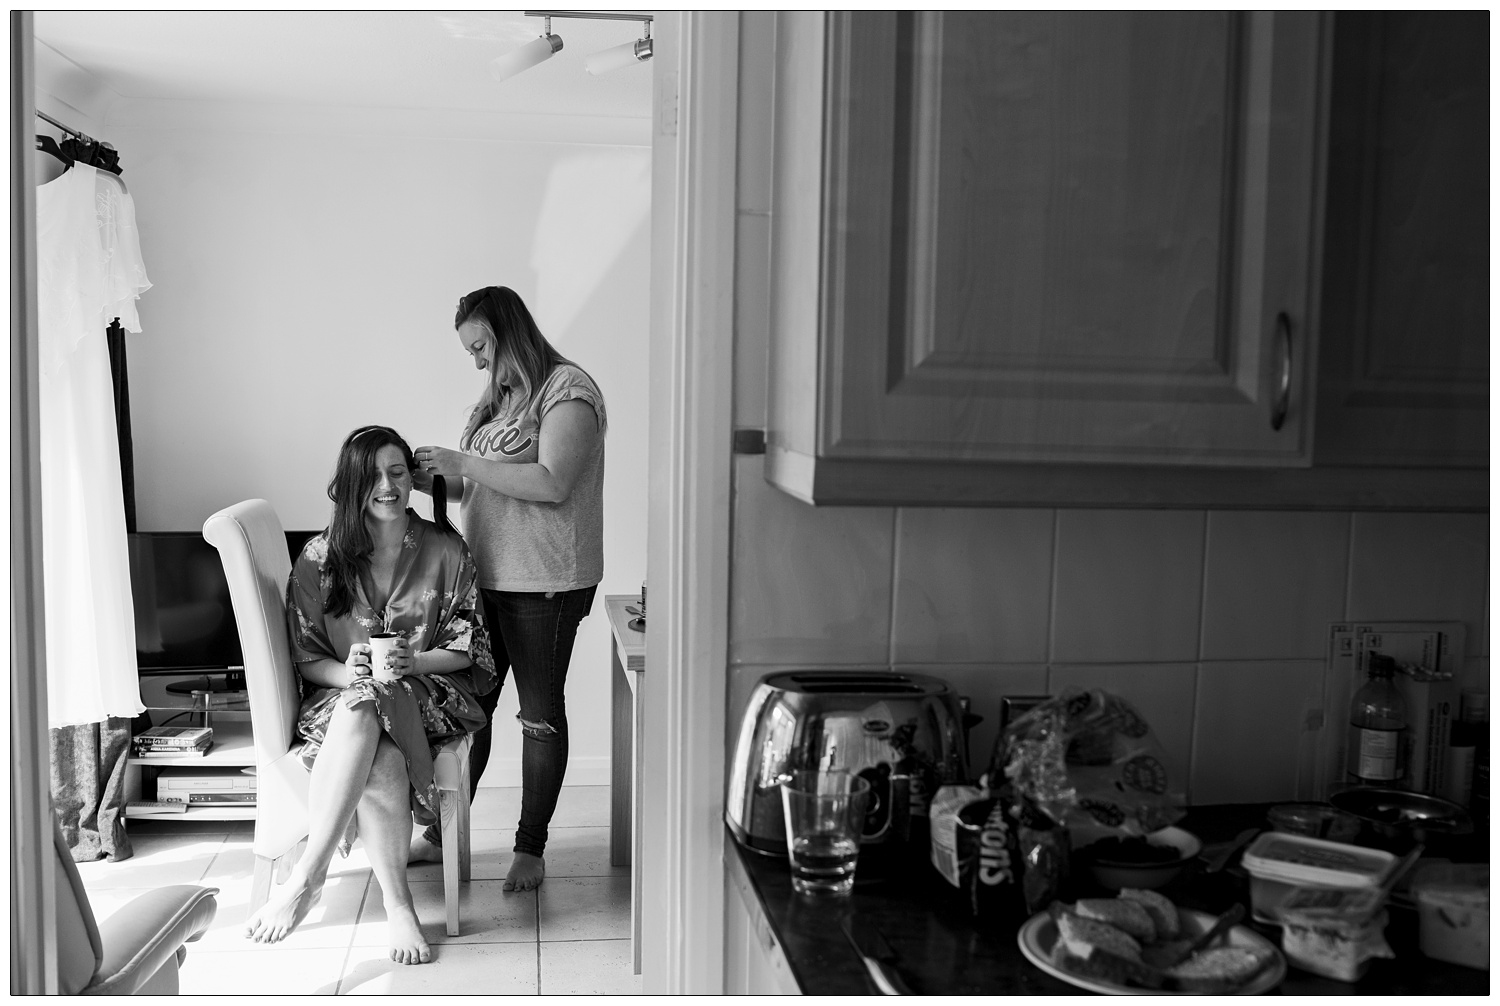 A friend plating the bride's hair. Seen through the doorway from the kitchen.